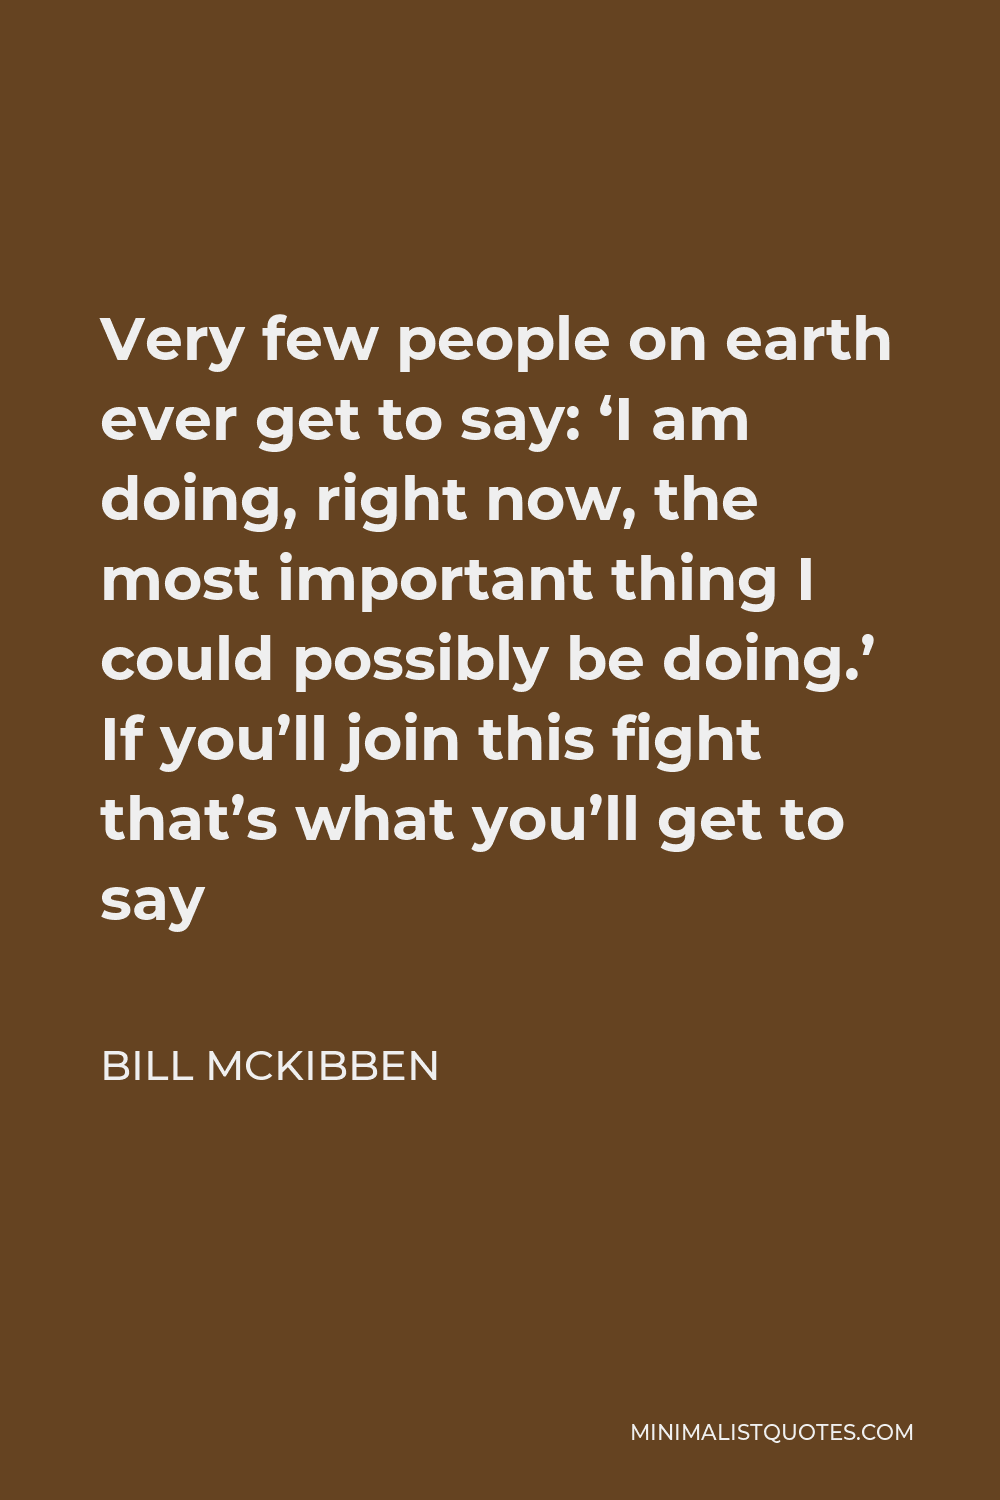 Bill McKibben Quote - Very few people on earth ever get to say: ‘I am doing, right now, the most important thing I could possibly be doing.’ If you’ll join this fight that’s what you’ll get to say